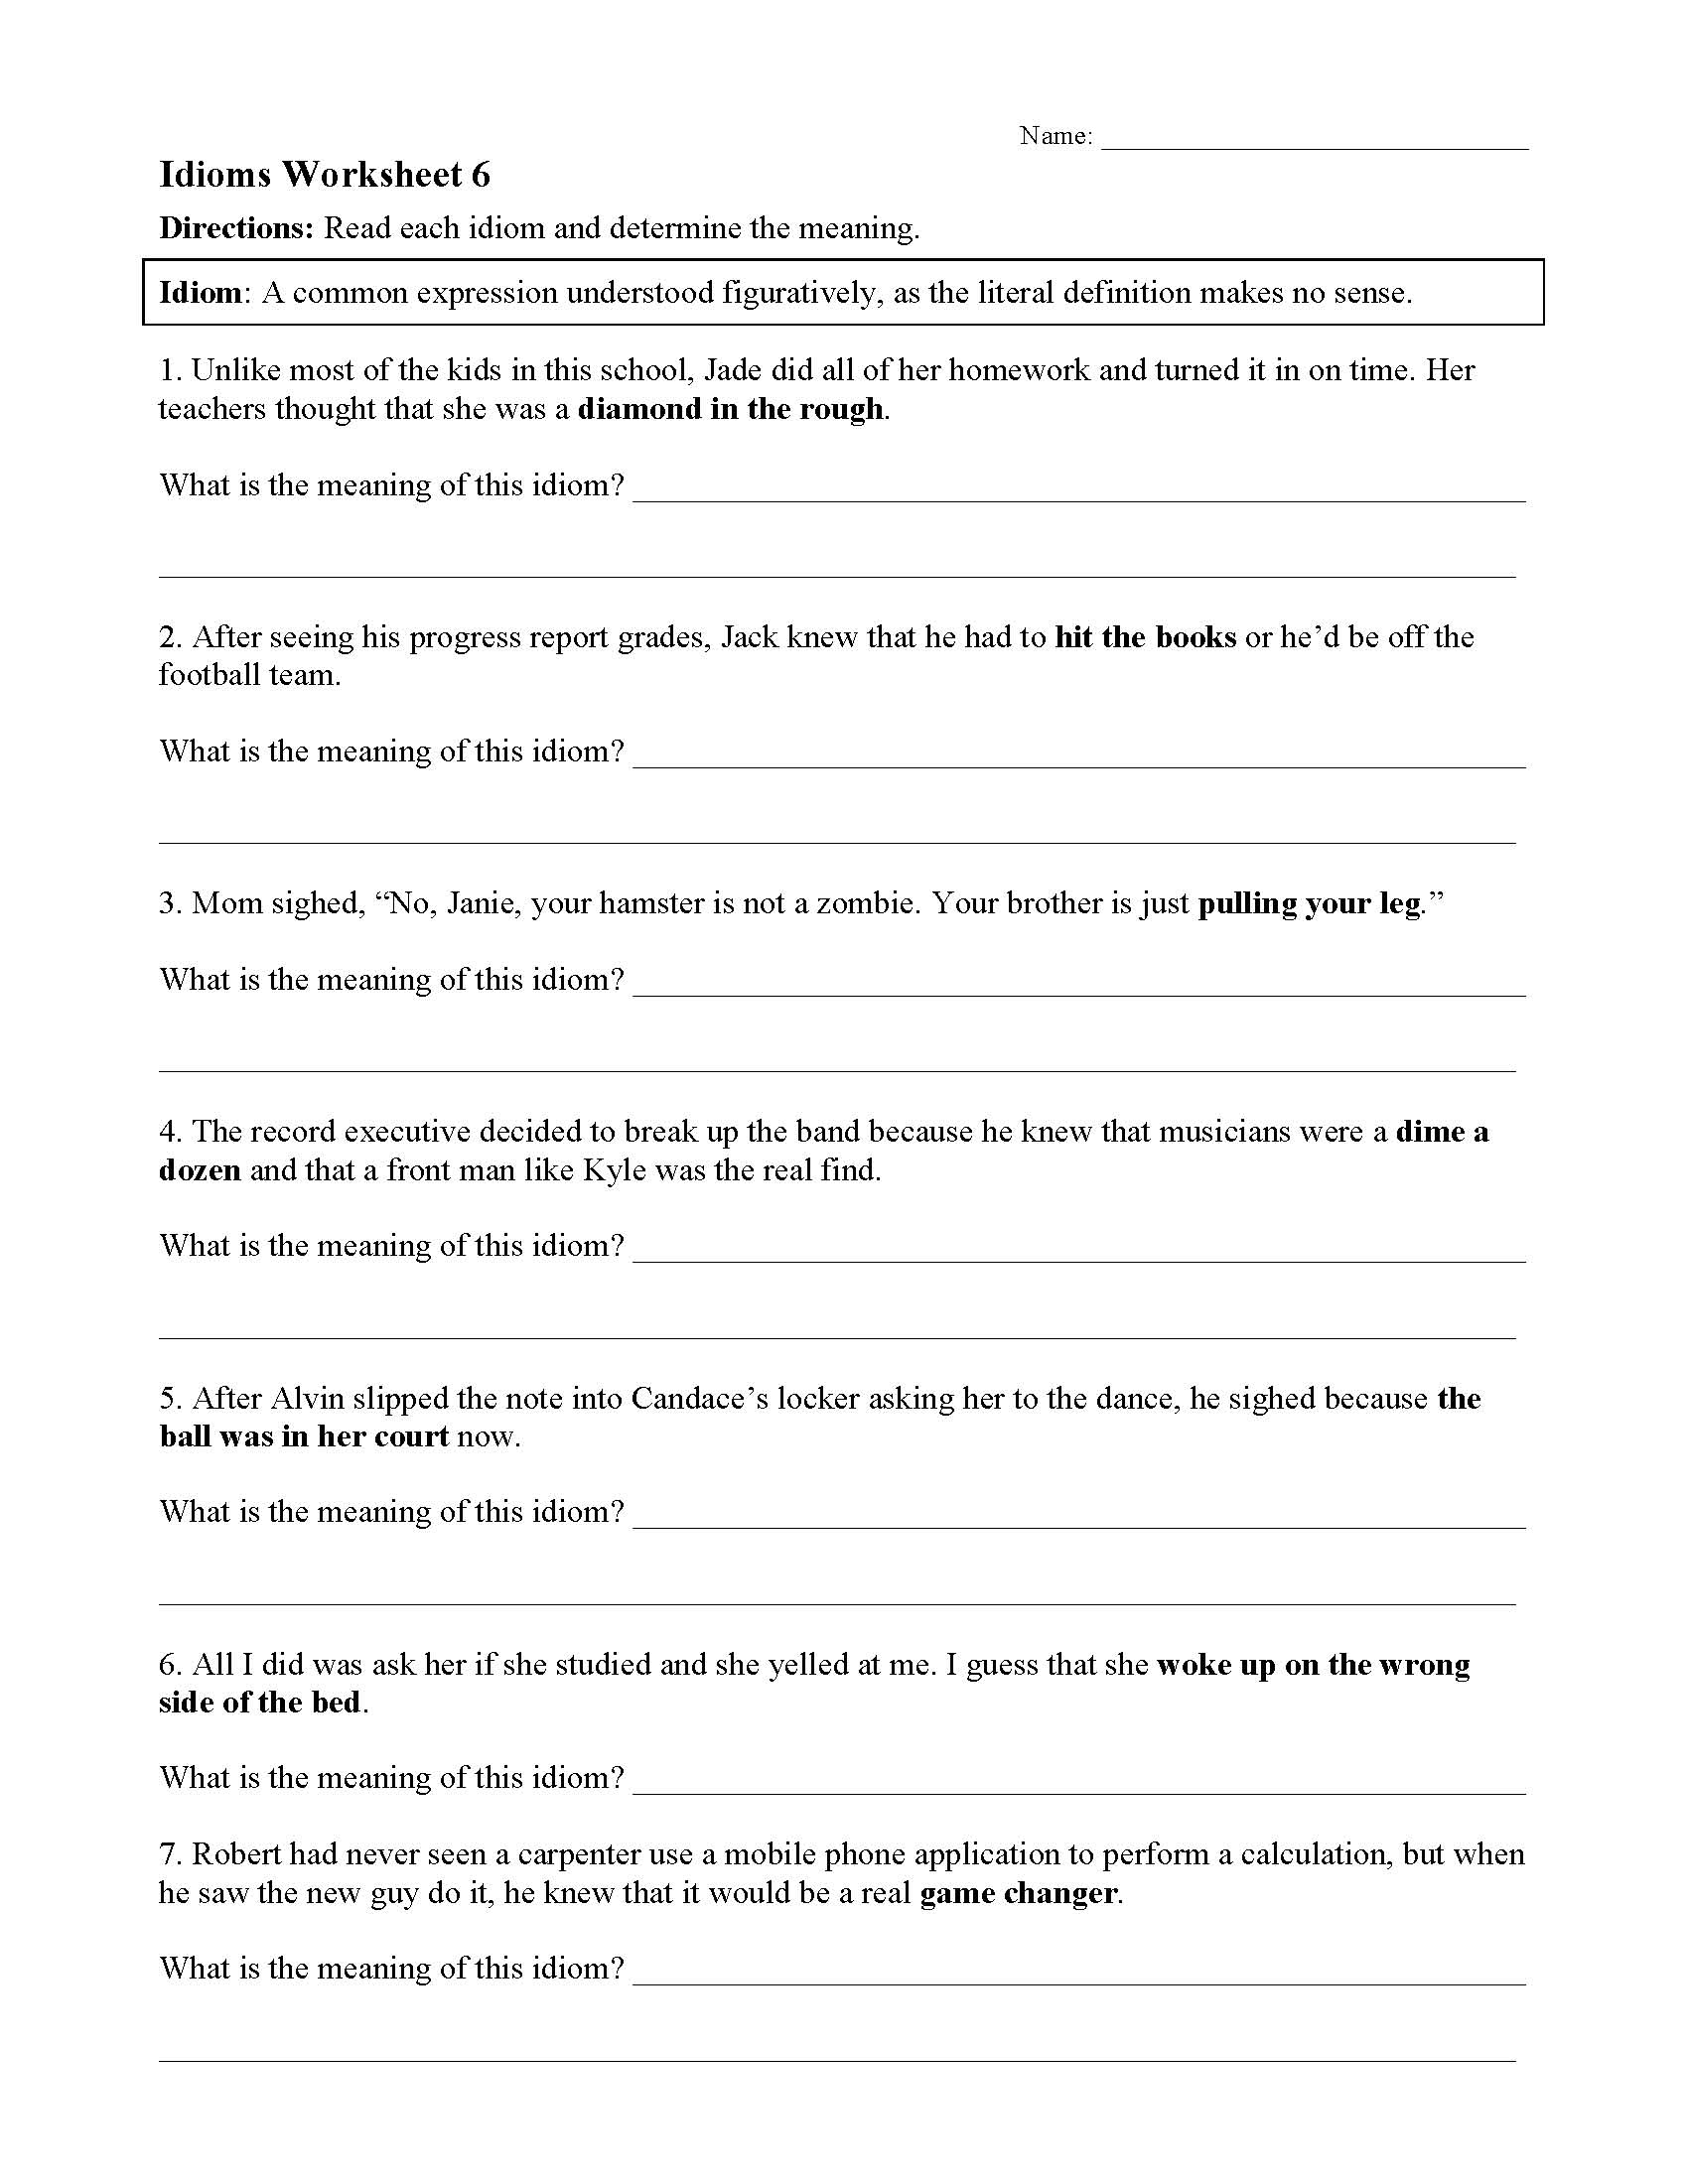 This is a preview image of Idiom Worksheet 6. Click on it to enlarge it or view the source file.